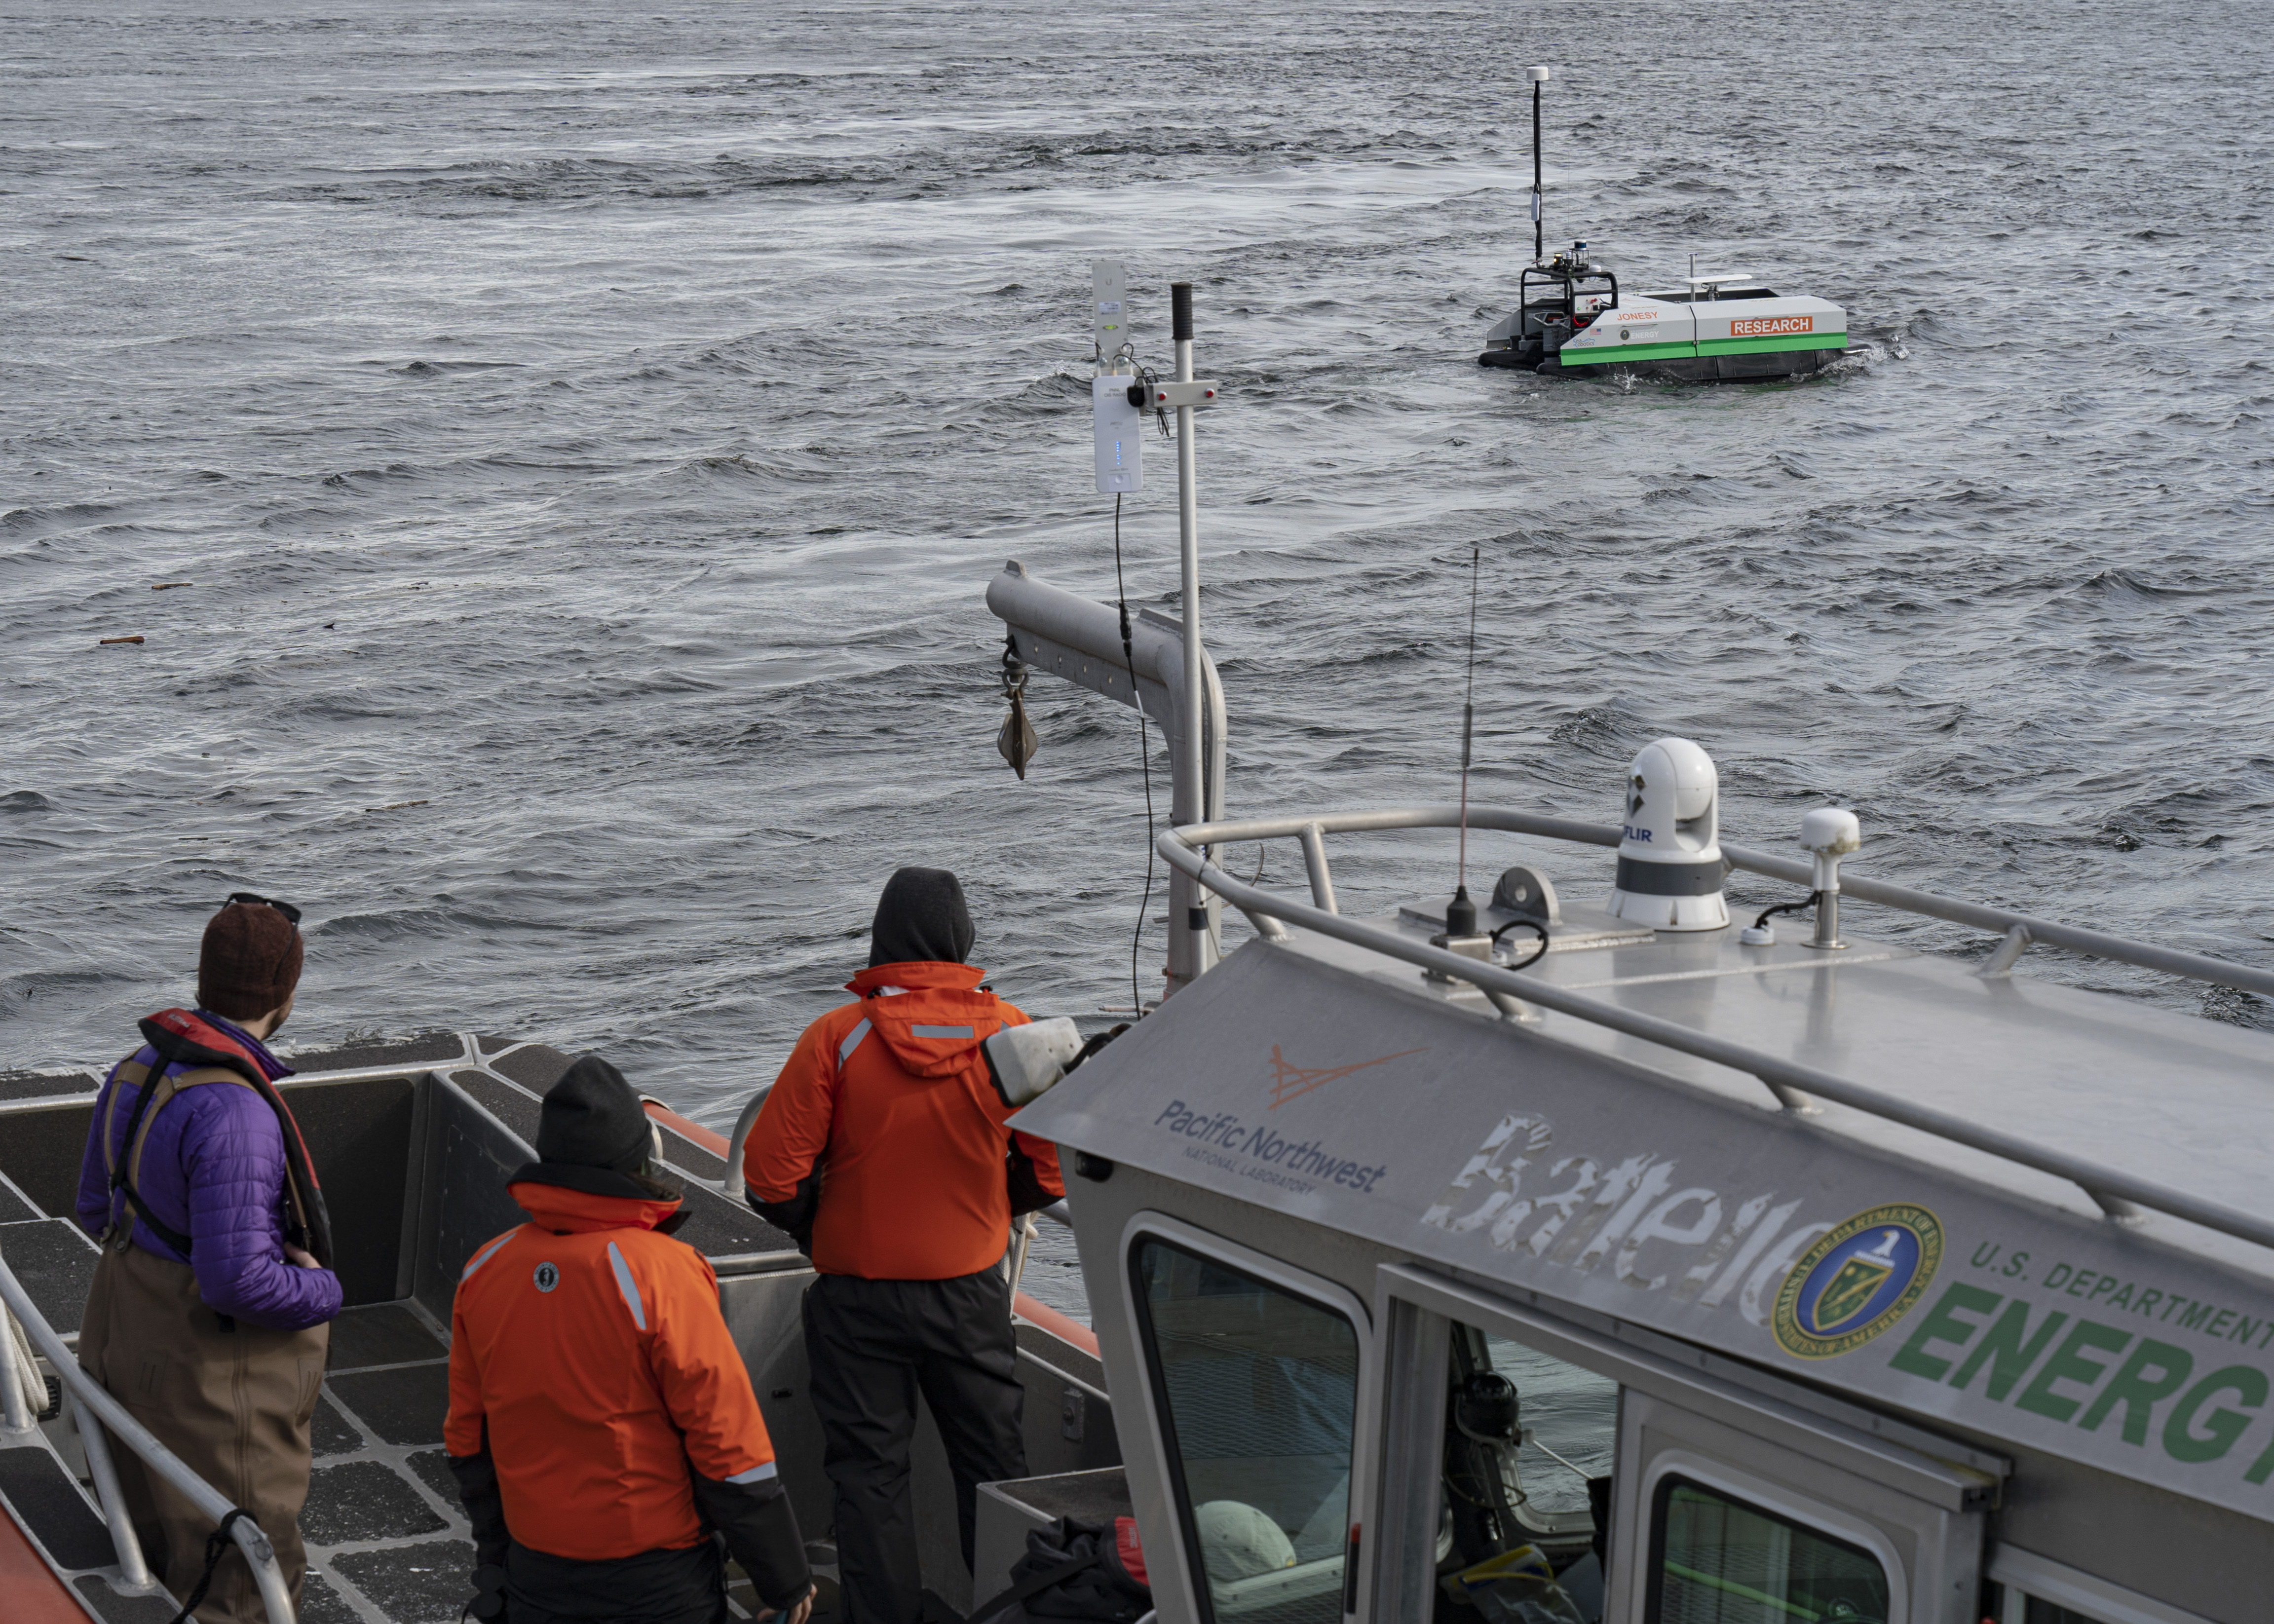 Researchers watch the maiden voyage of the new autonomous surface vehicle from deck of the R/V Desdemona in Sequim Bay